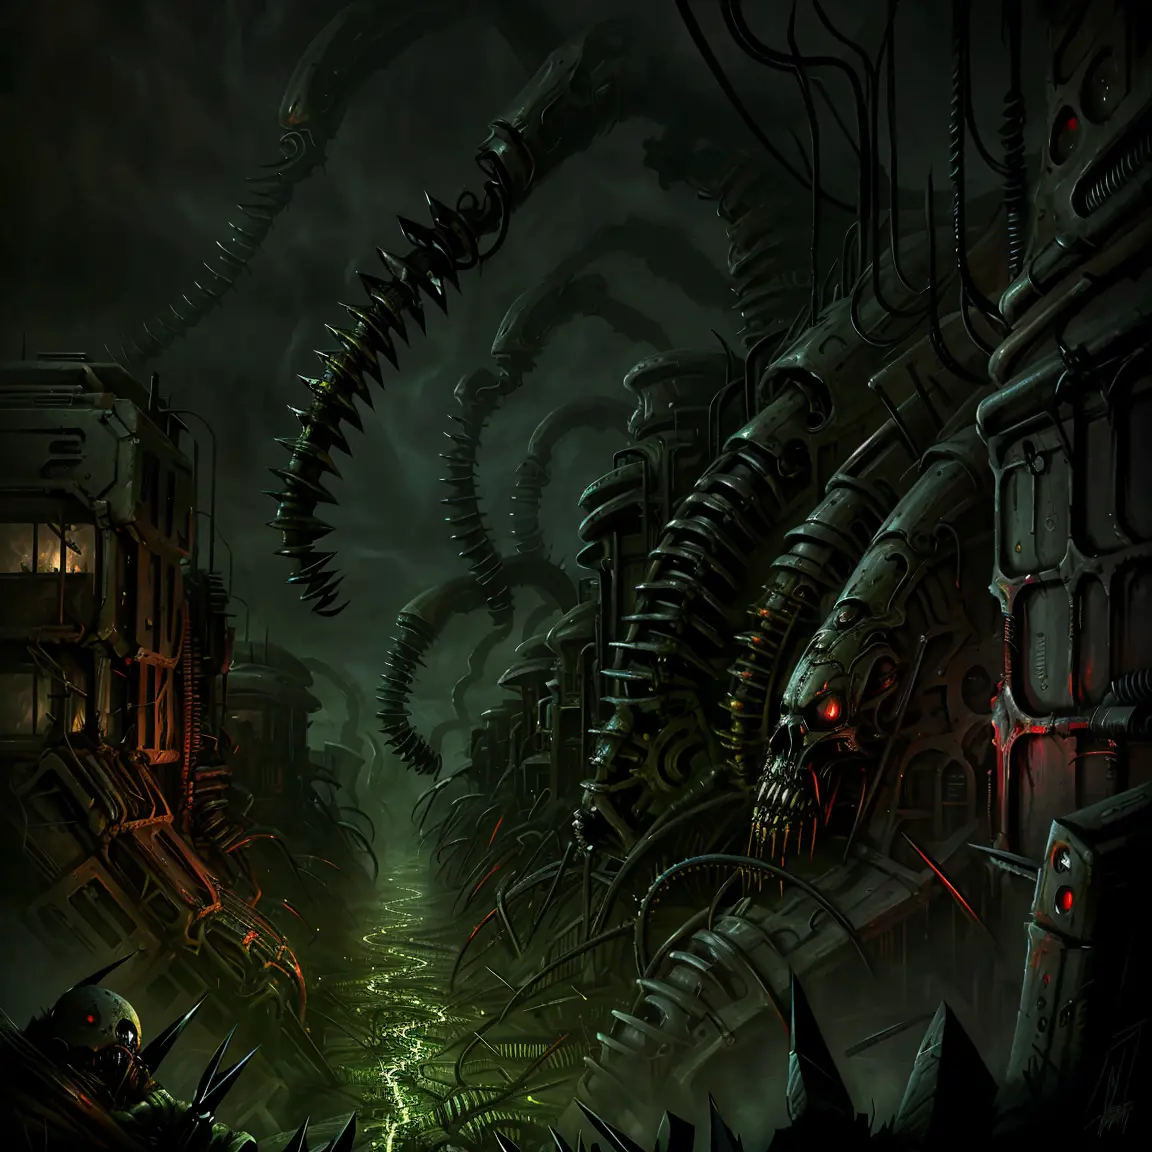 Masterpiece painting, Biomechanical ooze invading the cities, horror art, a vast landscape of destruction, with many diabolical ...